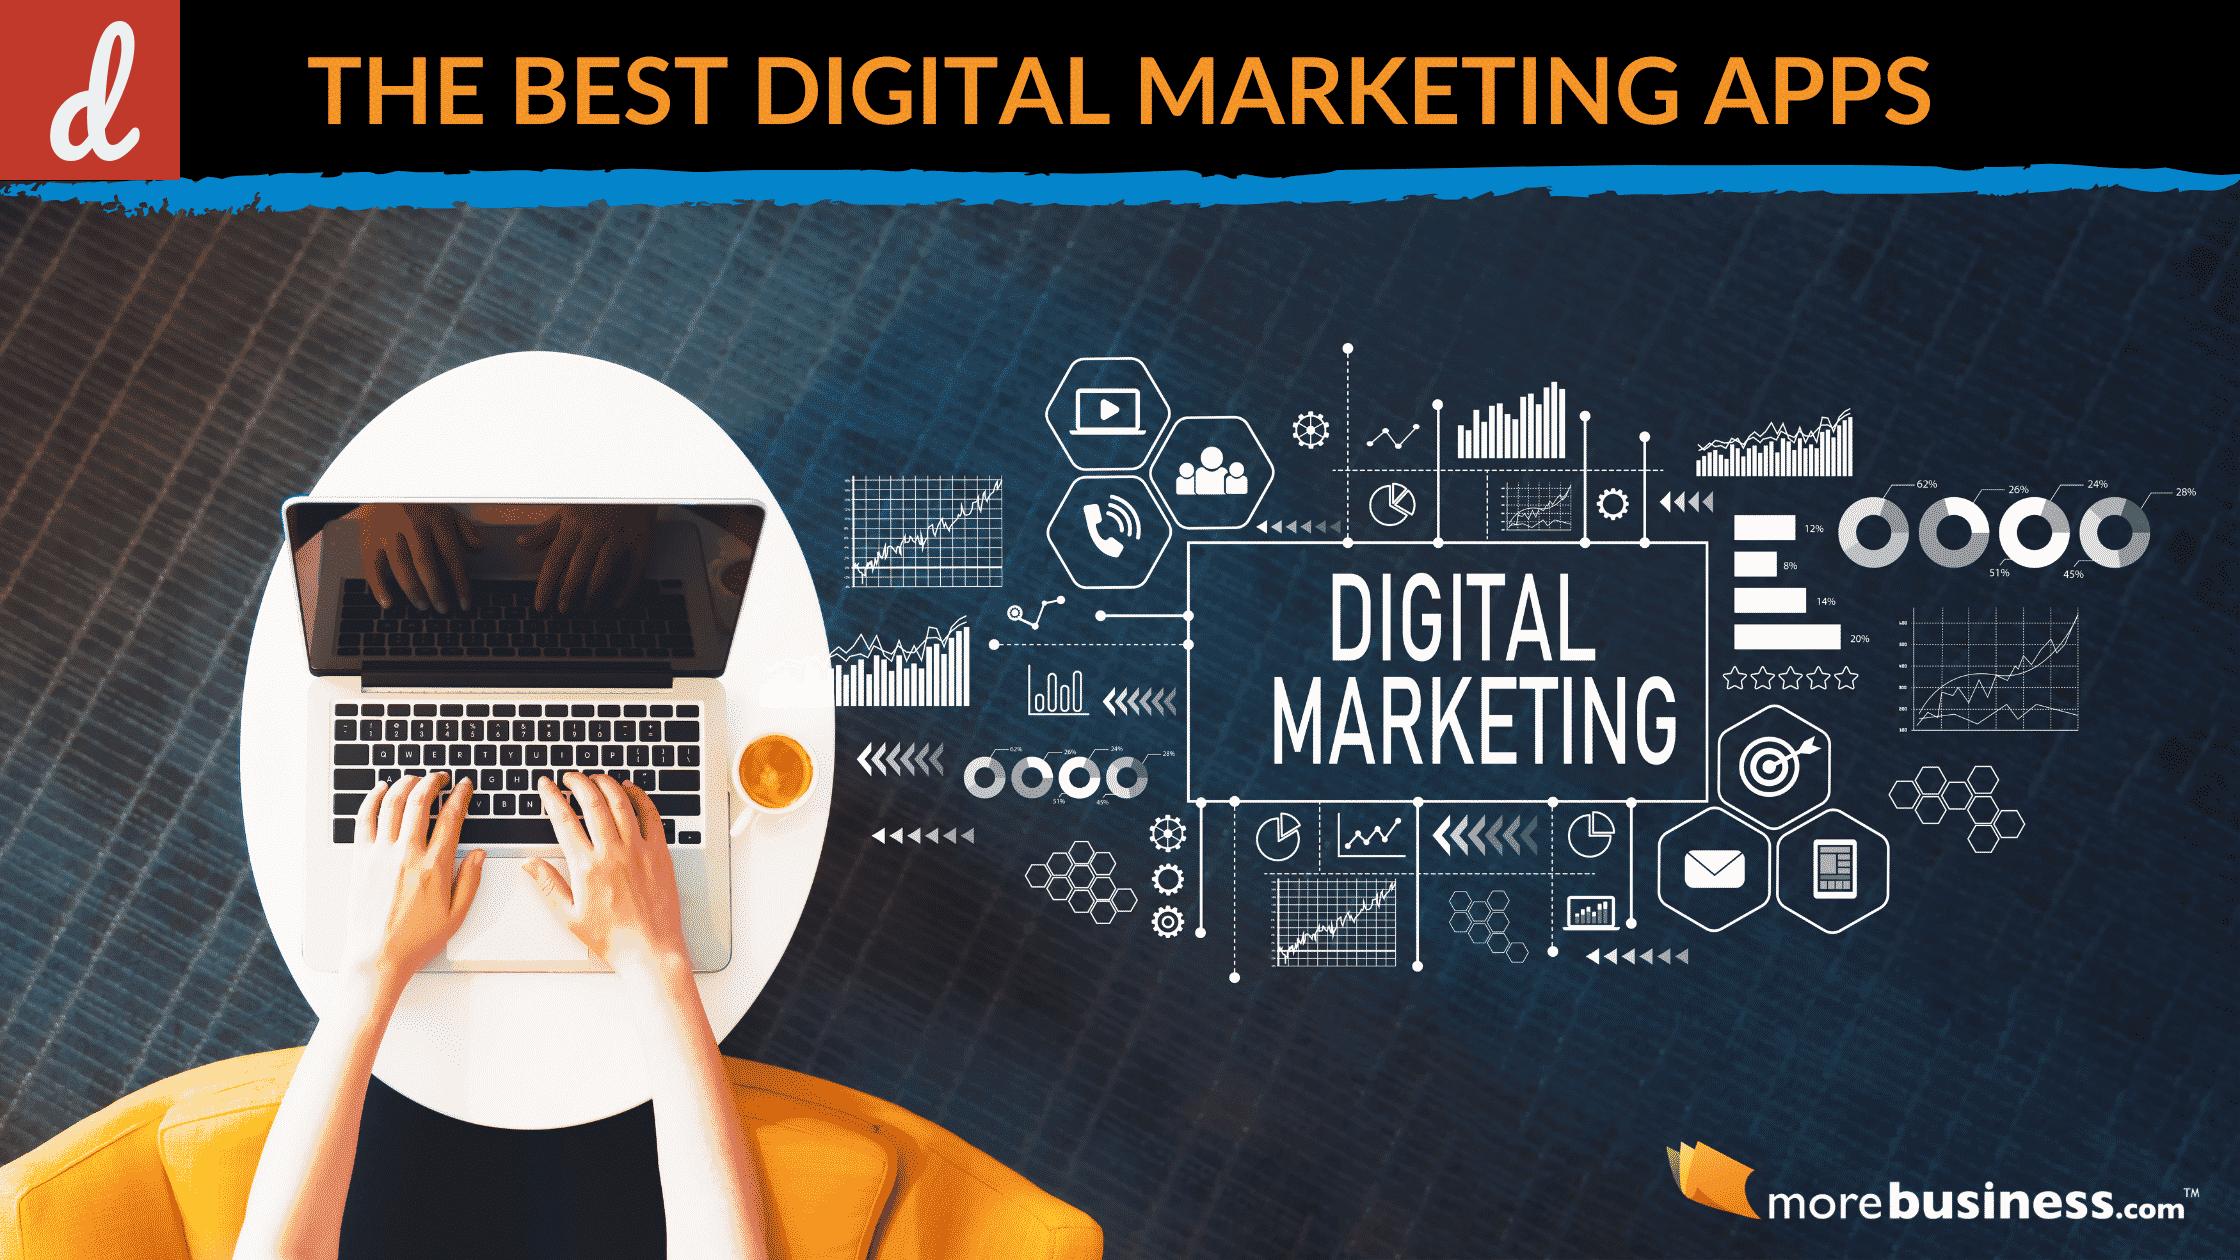 Top 10 Digital Marketing Apps You Should Know About
